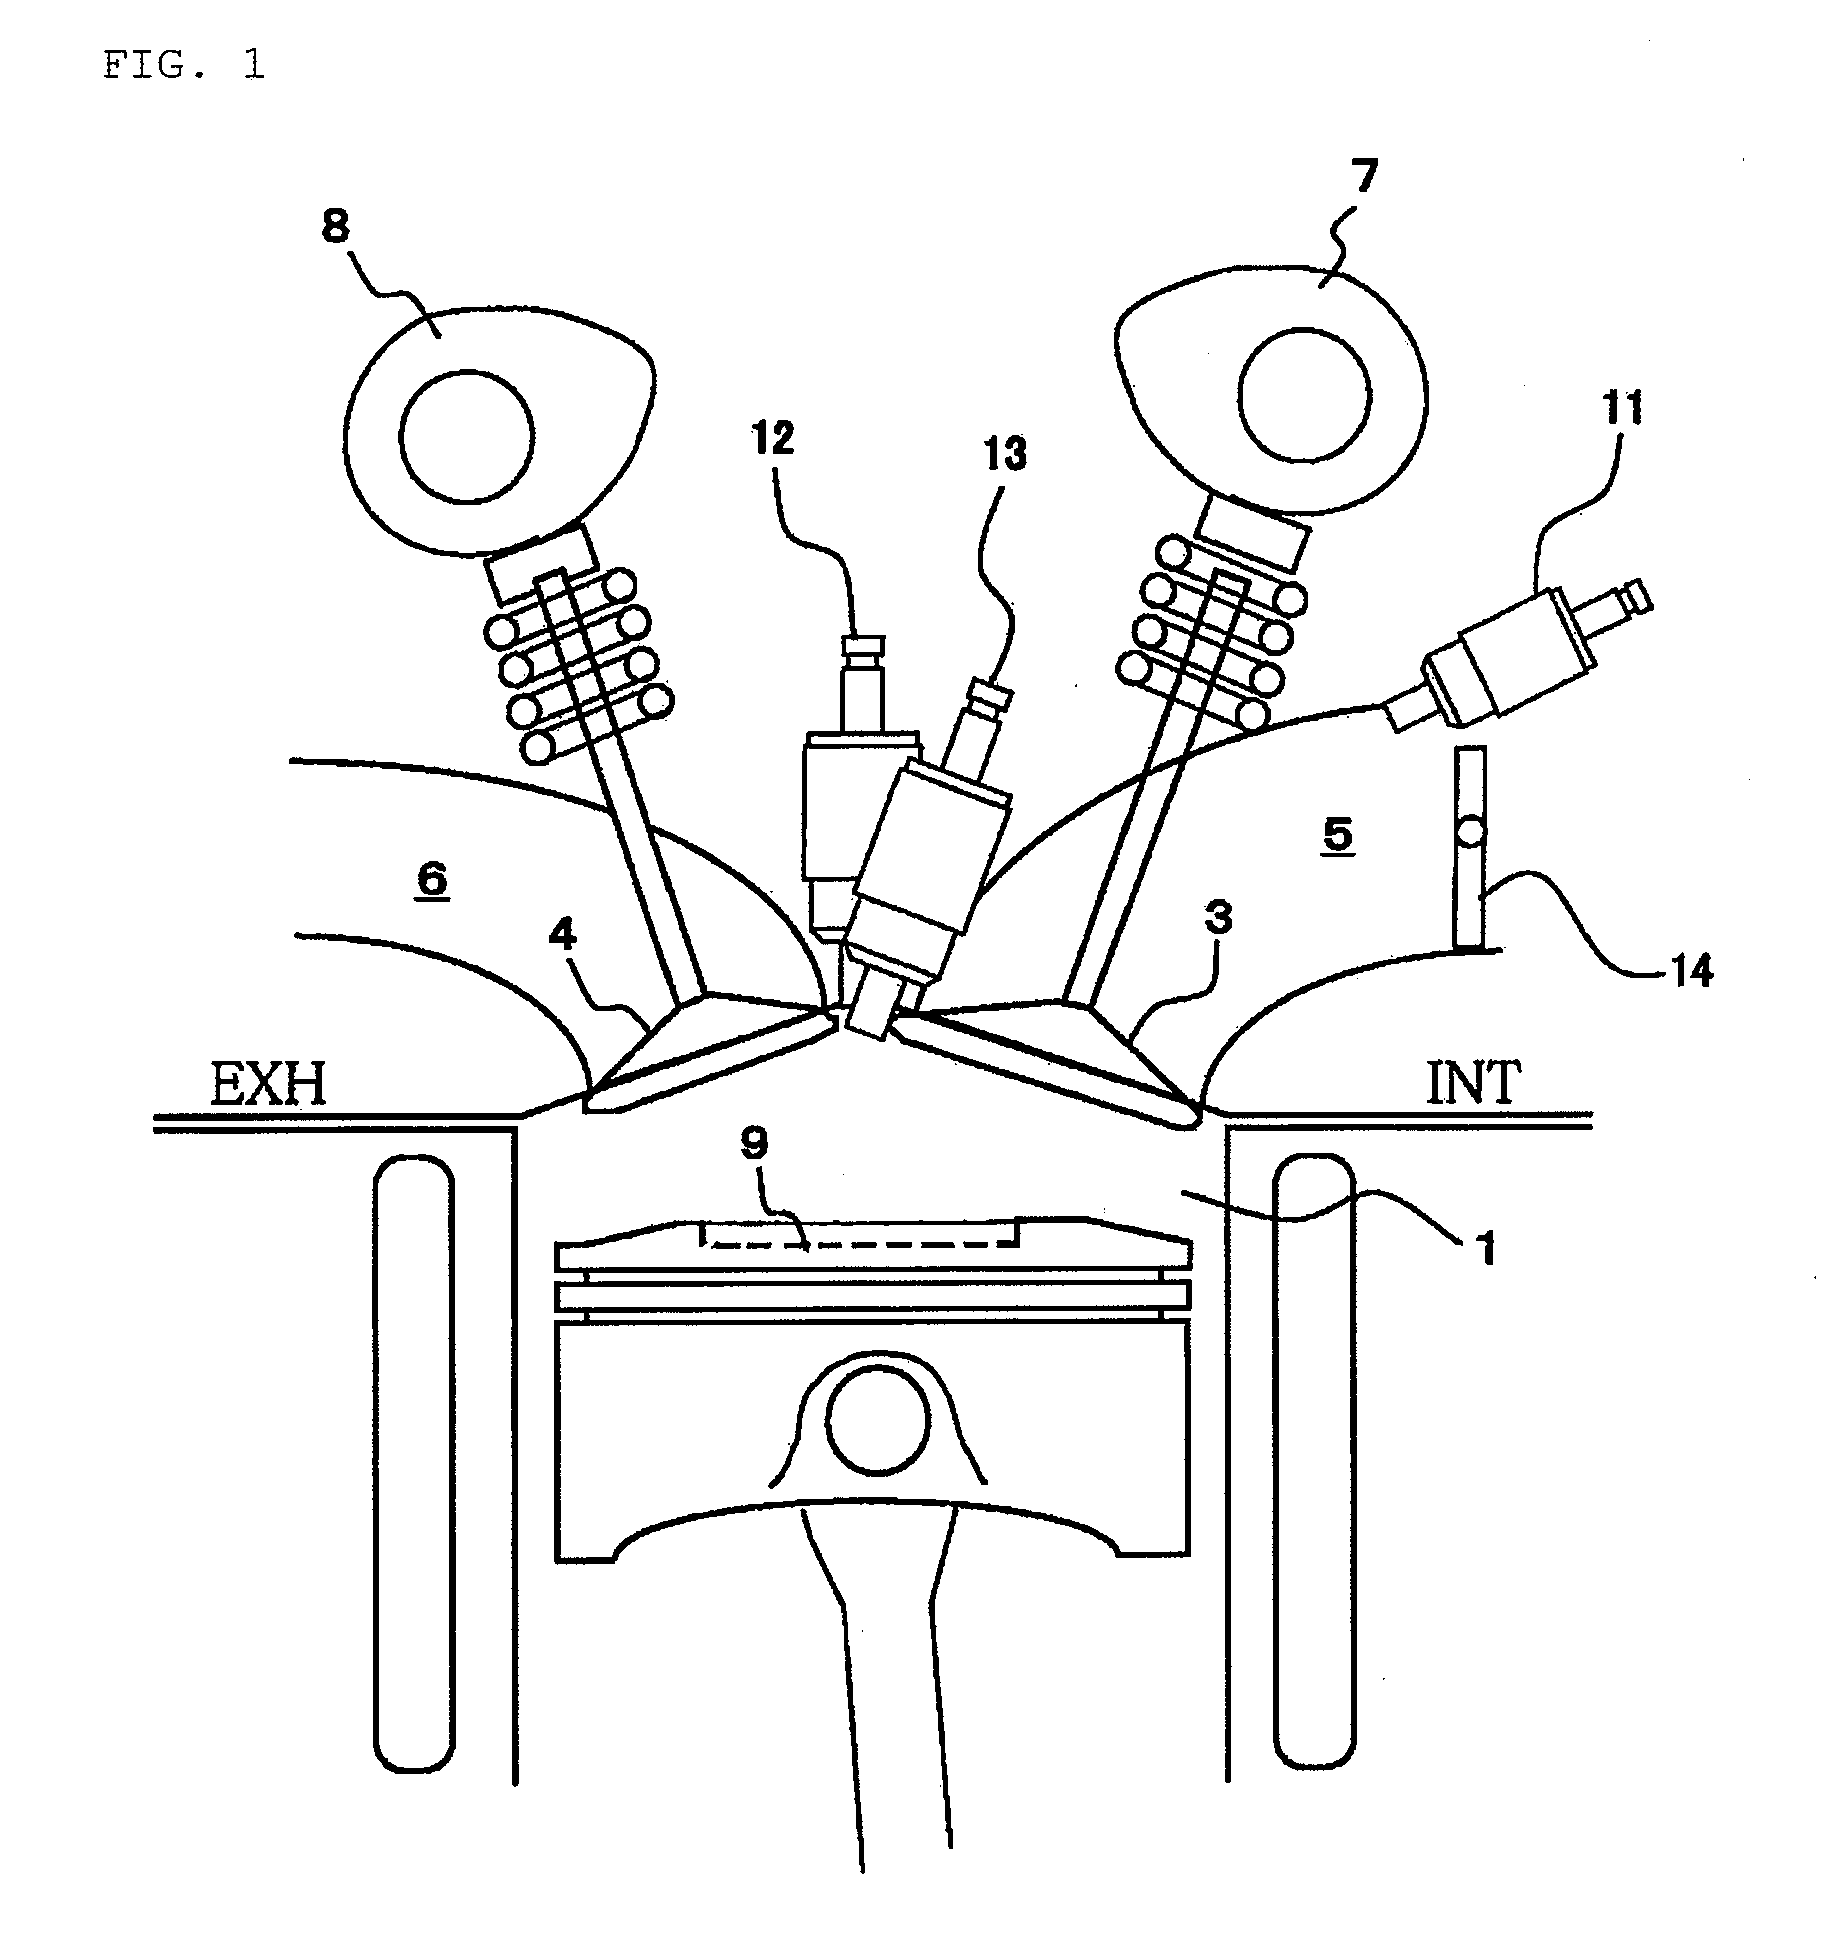 Combustion control system for internal combustion engine